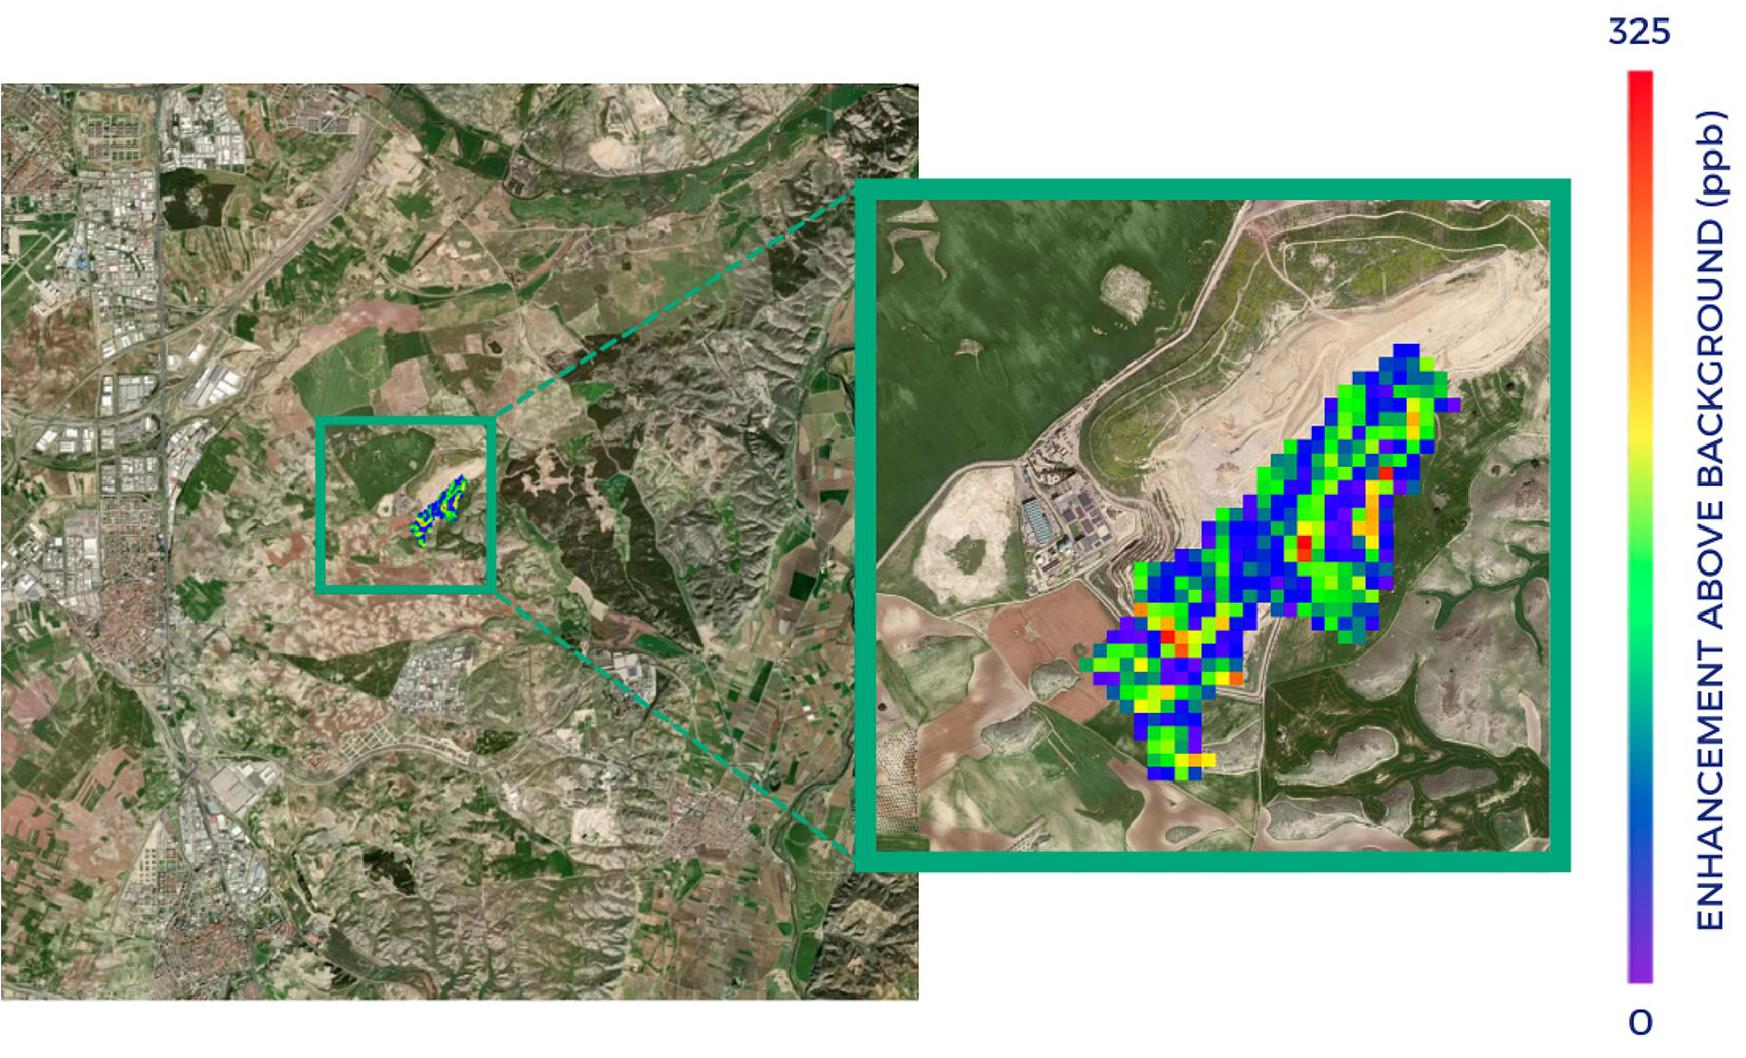 Figure 12: Methane plumes were again observed at the Spanish landfill sites in October 2021. The GHGSat image shows the methane emissions from one of the landfill sites in Madrid on 13 October 2021 (image credit: GHGSat)